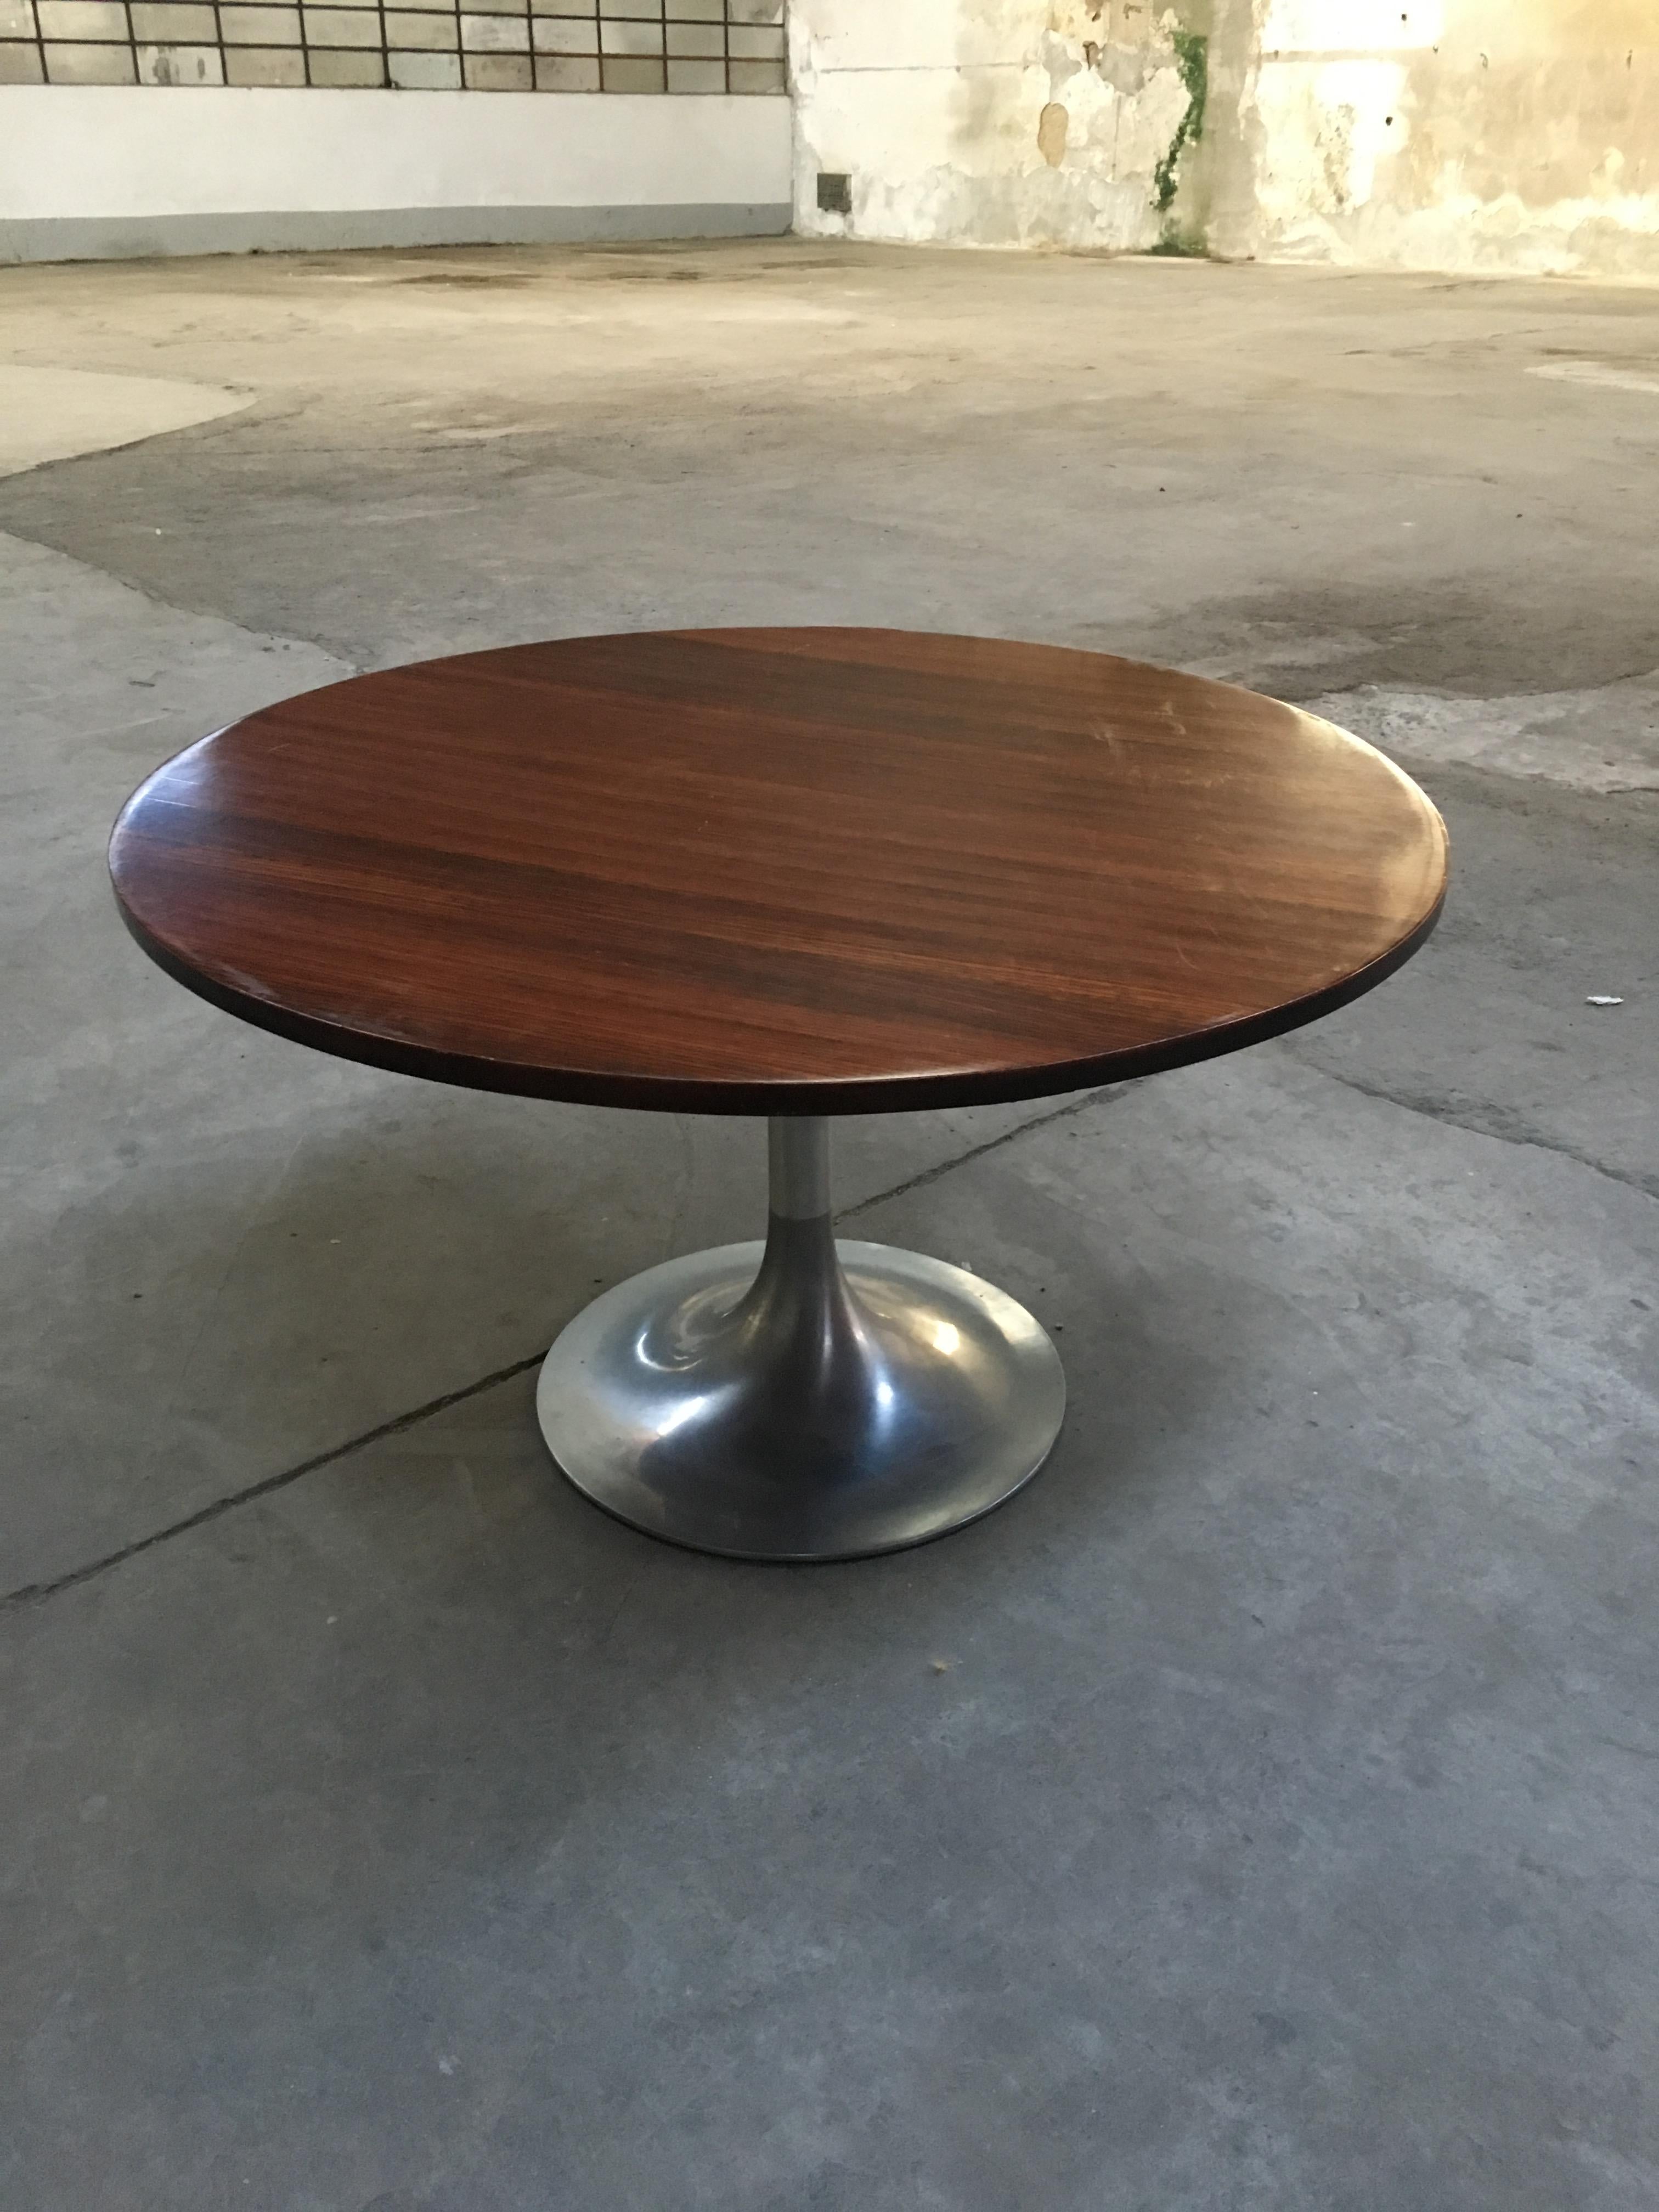 Mid-Century Modern Italian dining or center table with aluminum base and wooden top.